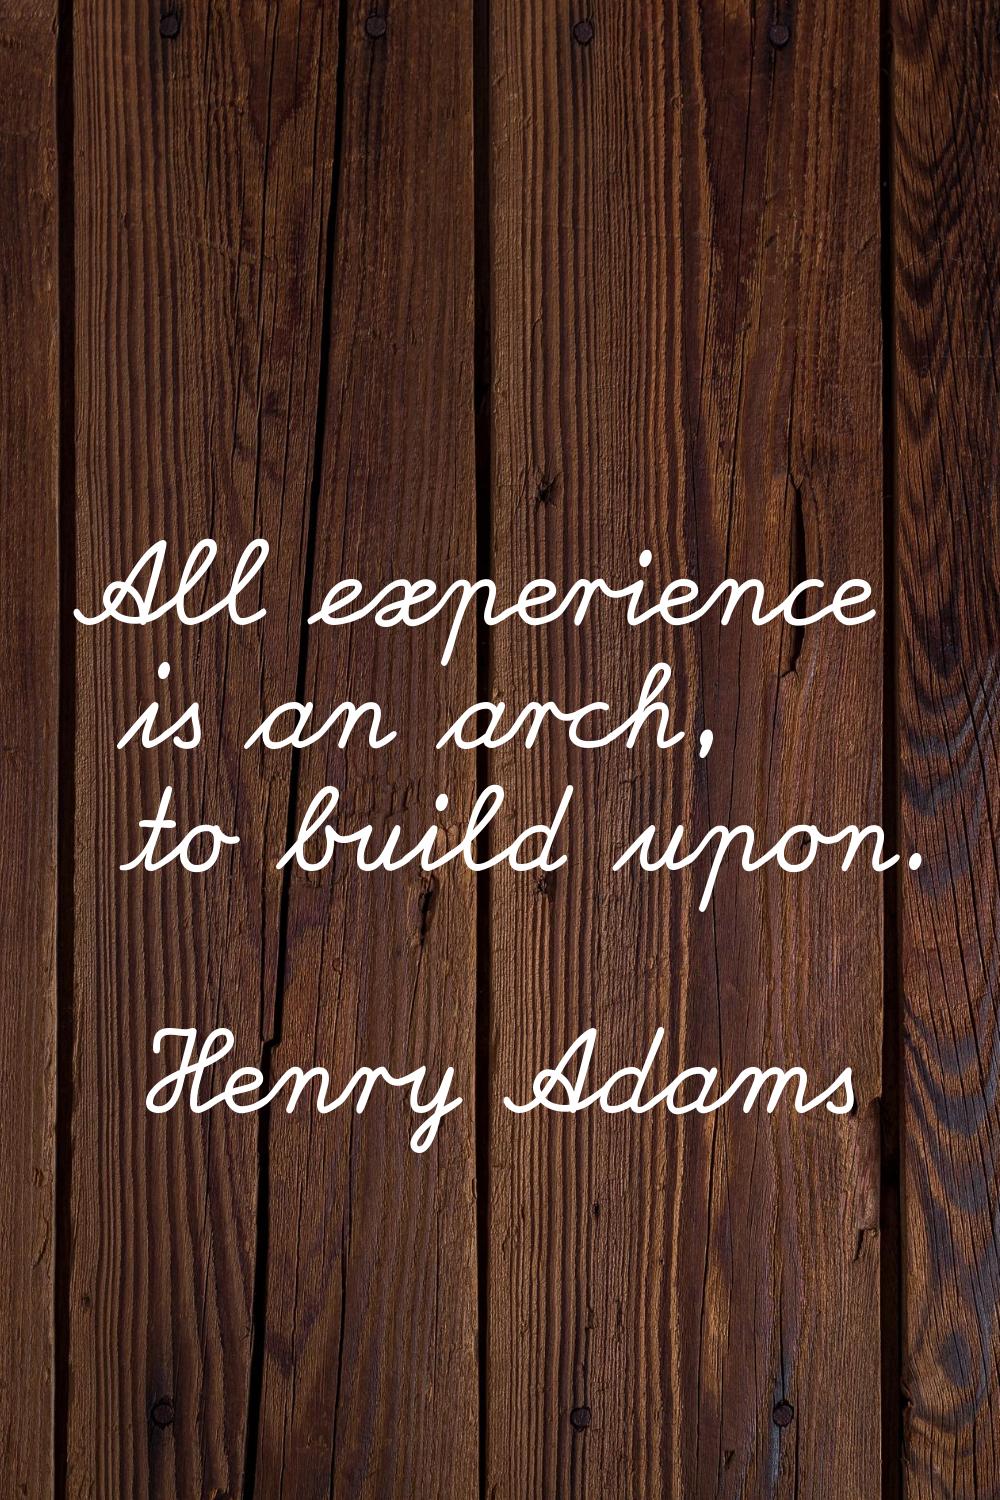 All experience is an arch, to build upon.